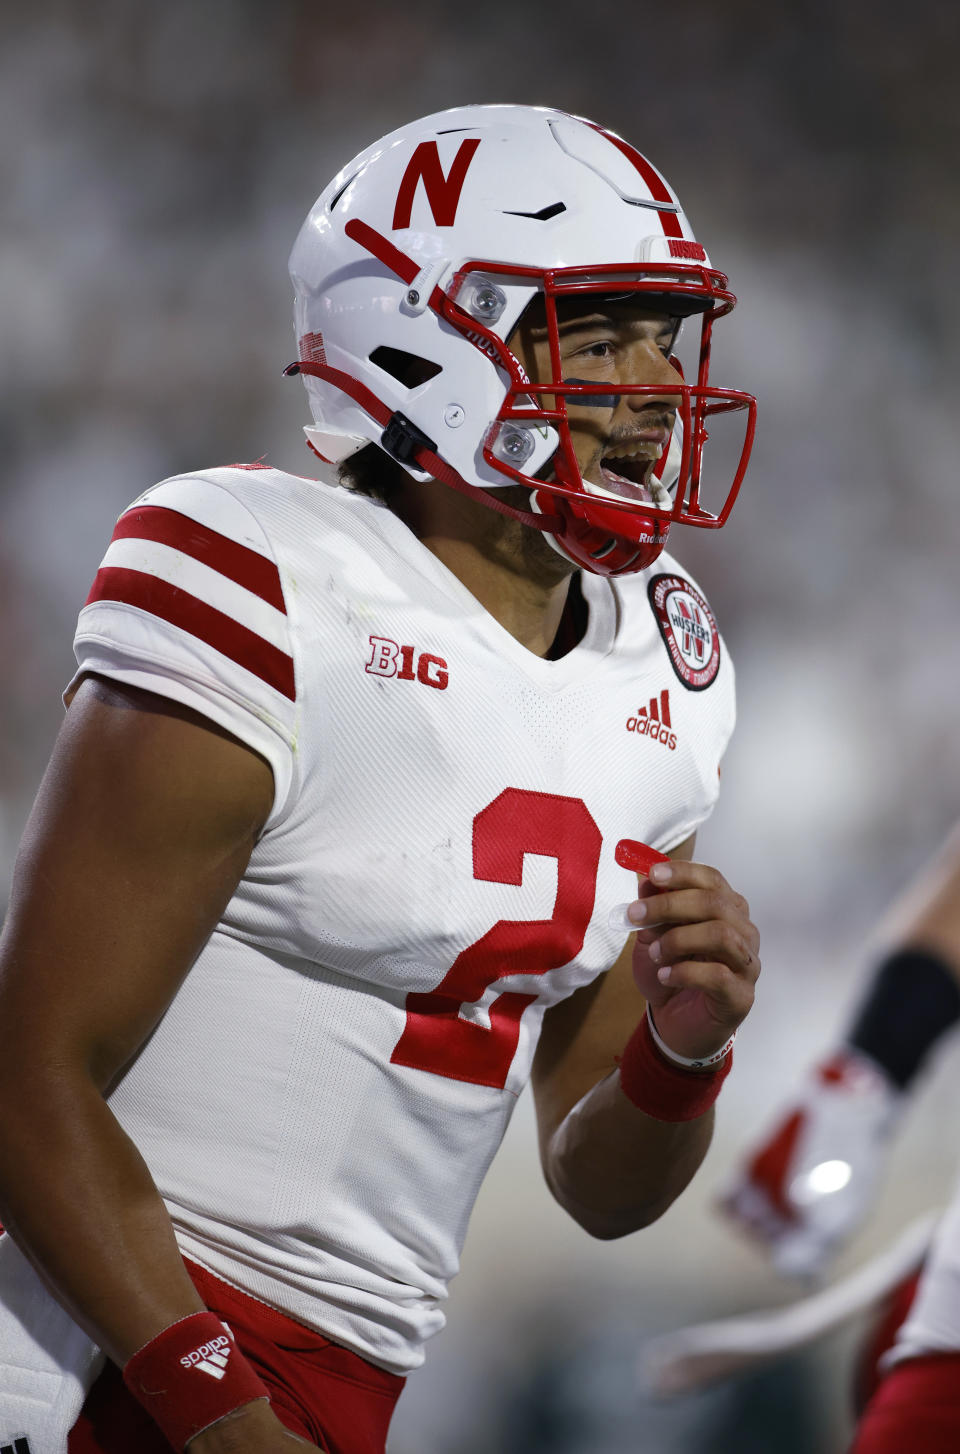 Nebraska quarterback Adrian Martinez celebrates his rushing touchdown against Michigan State during the second quarter of an NCAA college football game, Saturday, Sept. 25, 2021, in East Lansing, Mich. (AP Photo/Al Goldis)